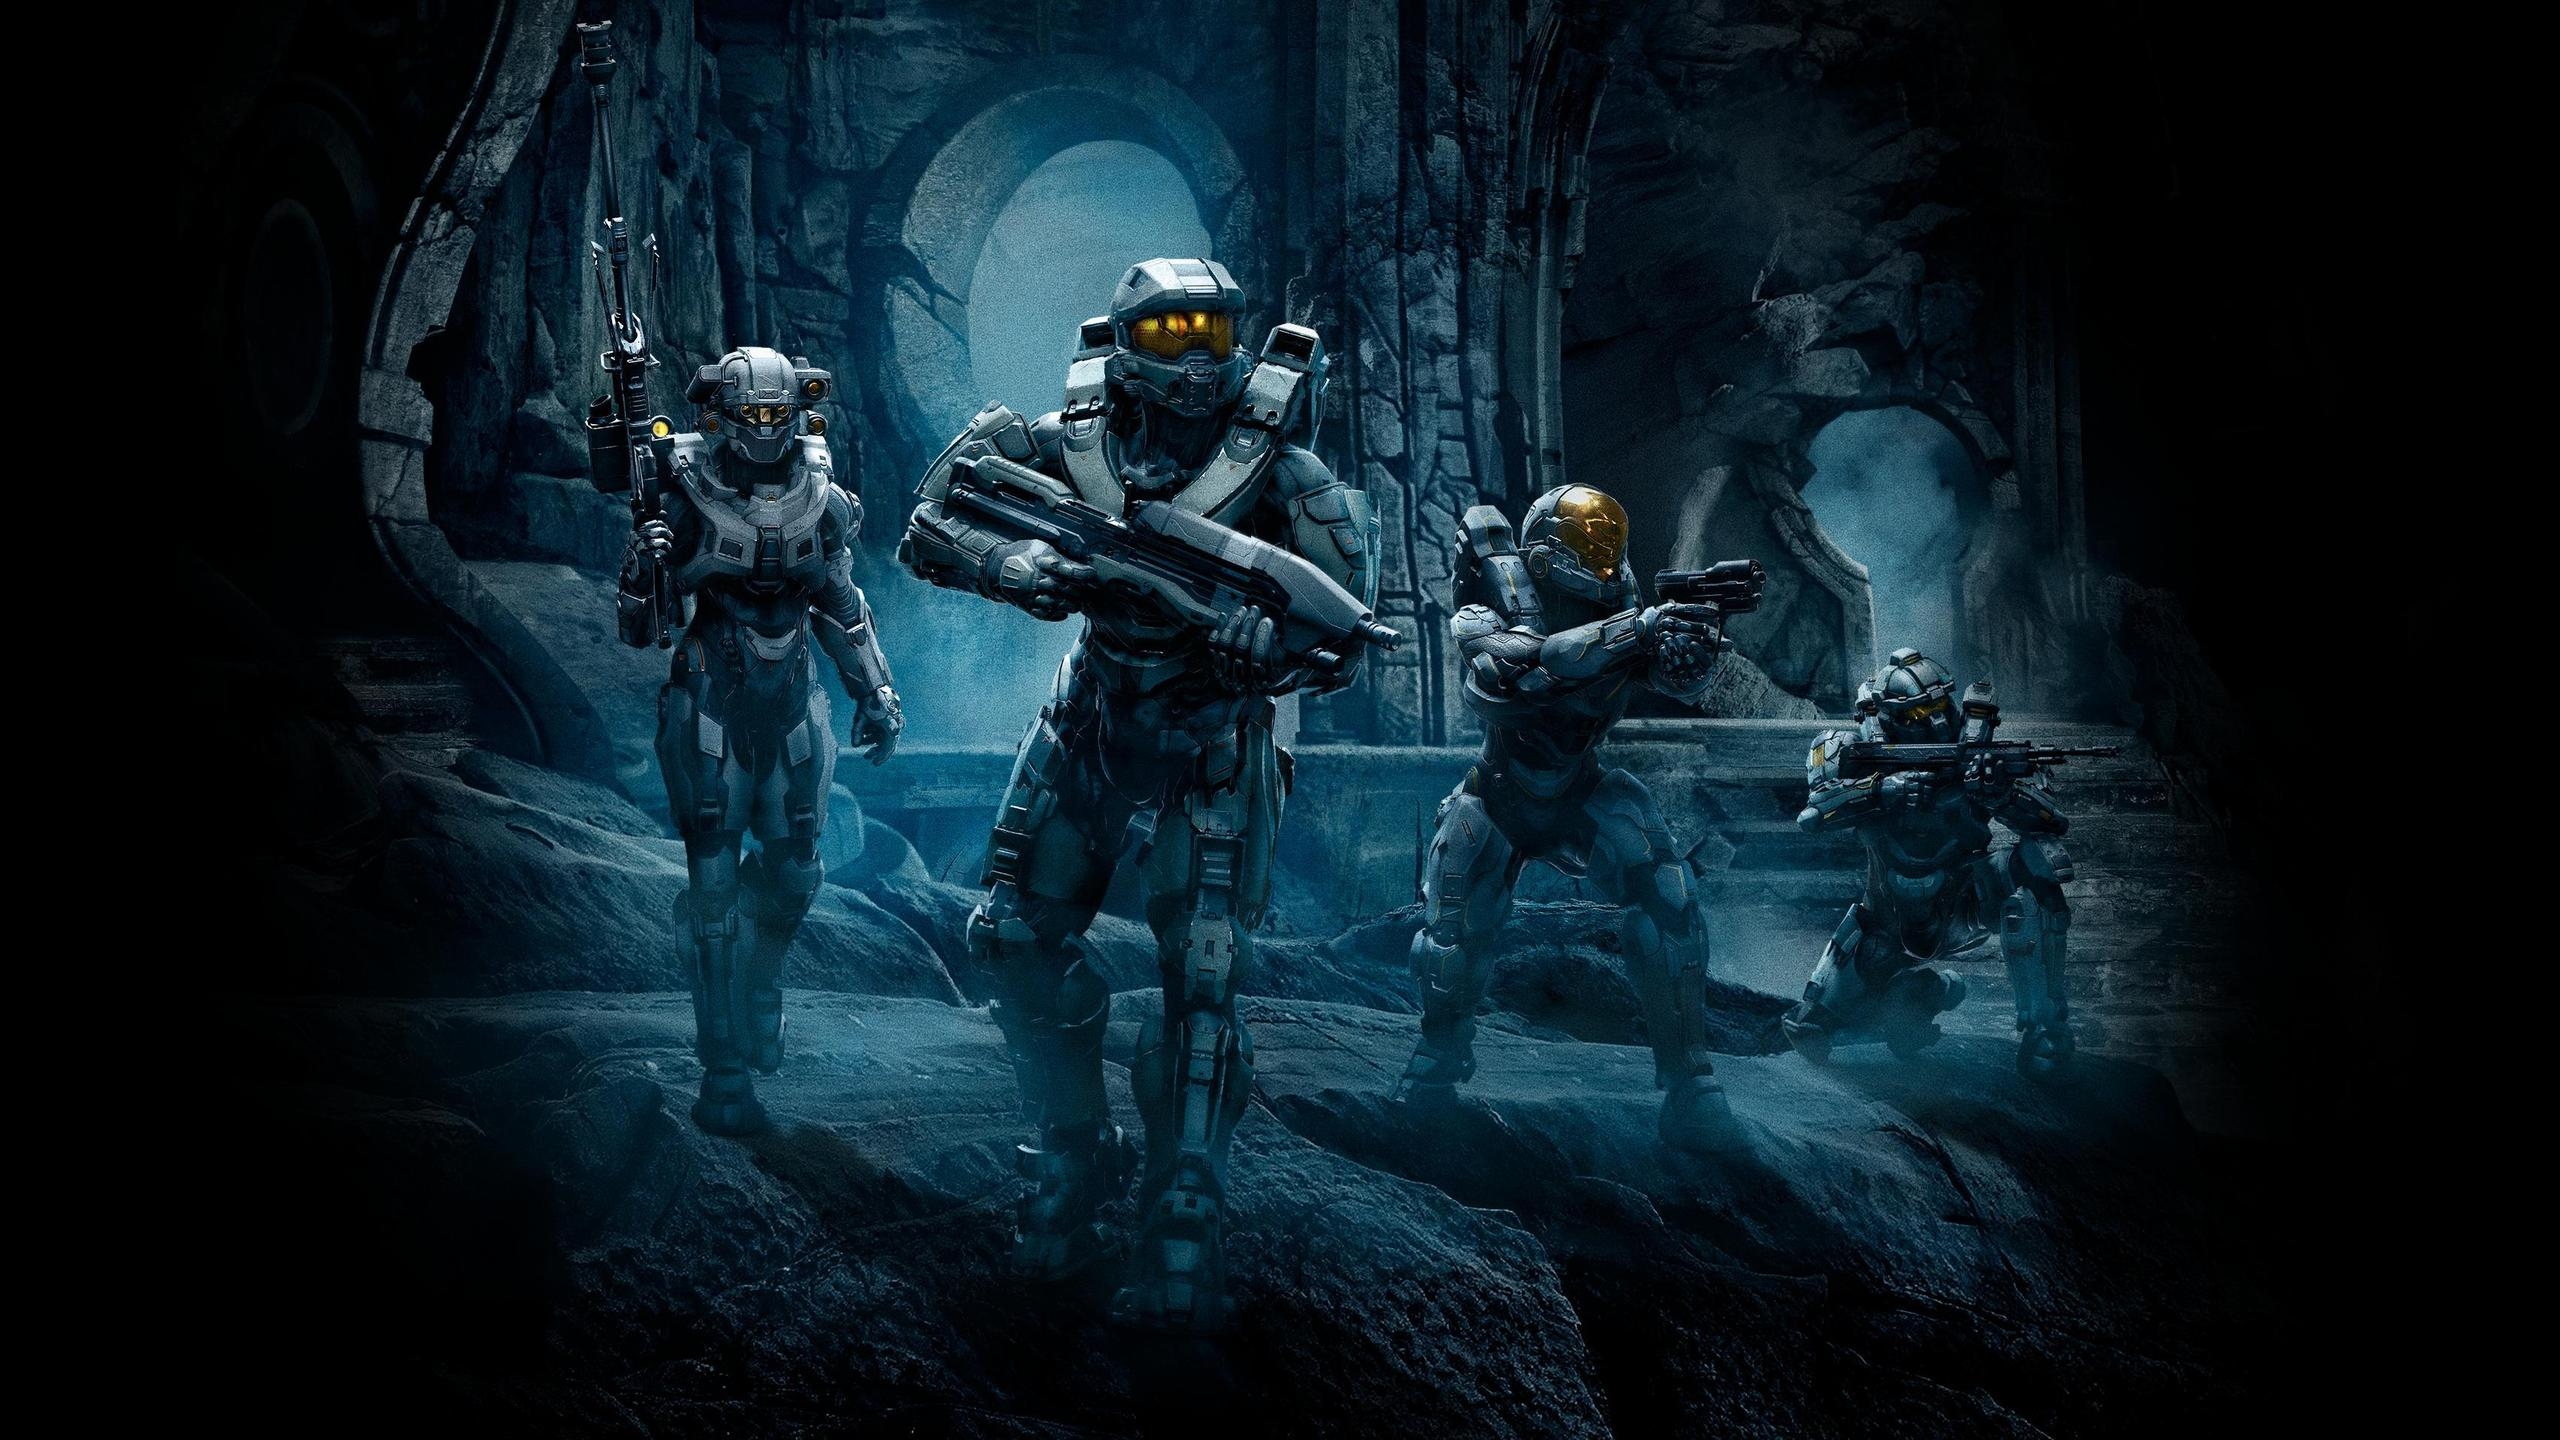 Halo 5 Characters for 2560x1440 HDTV resolution